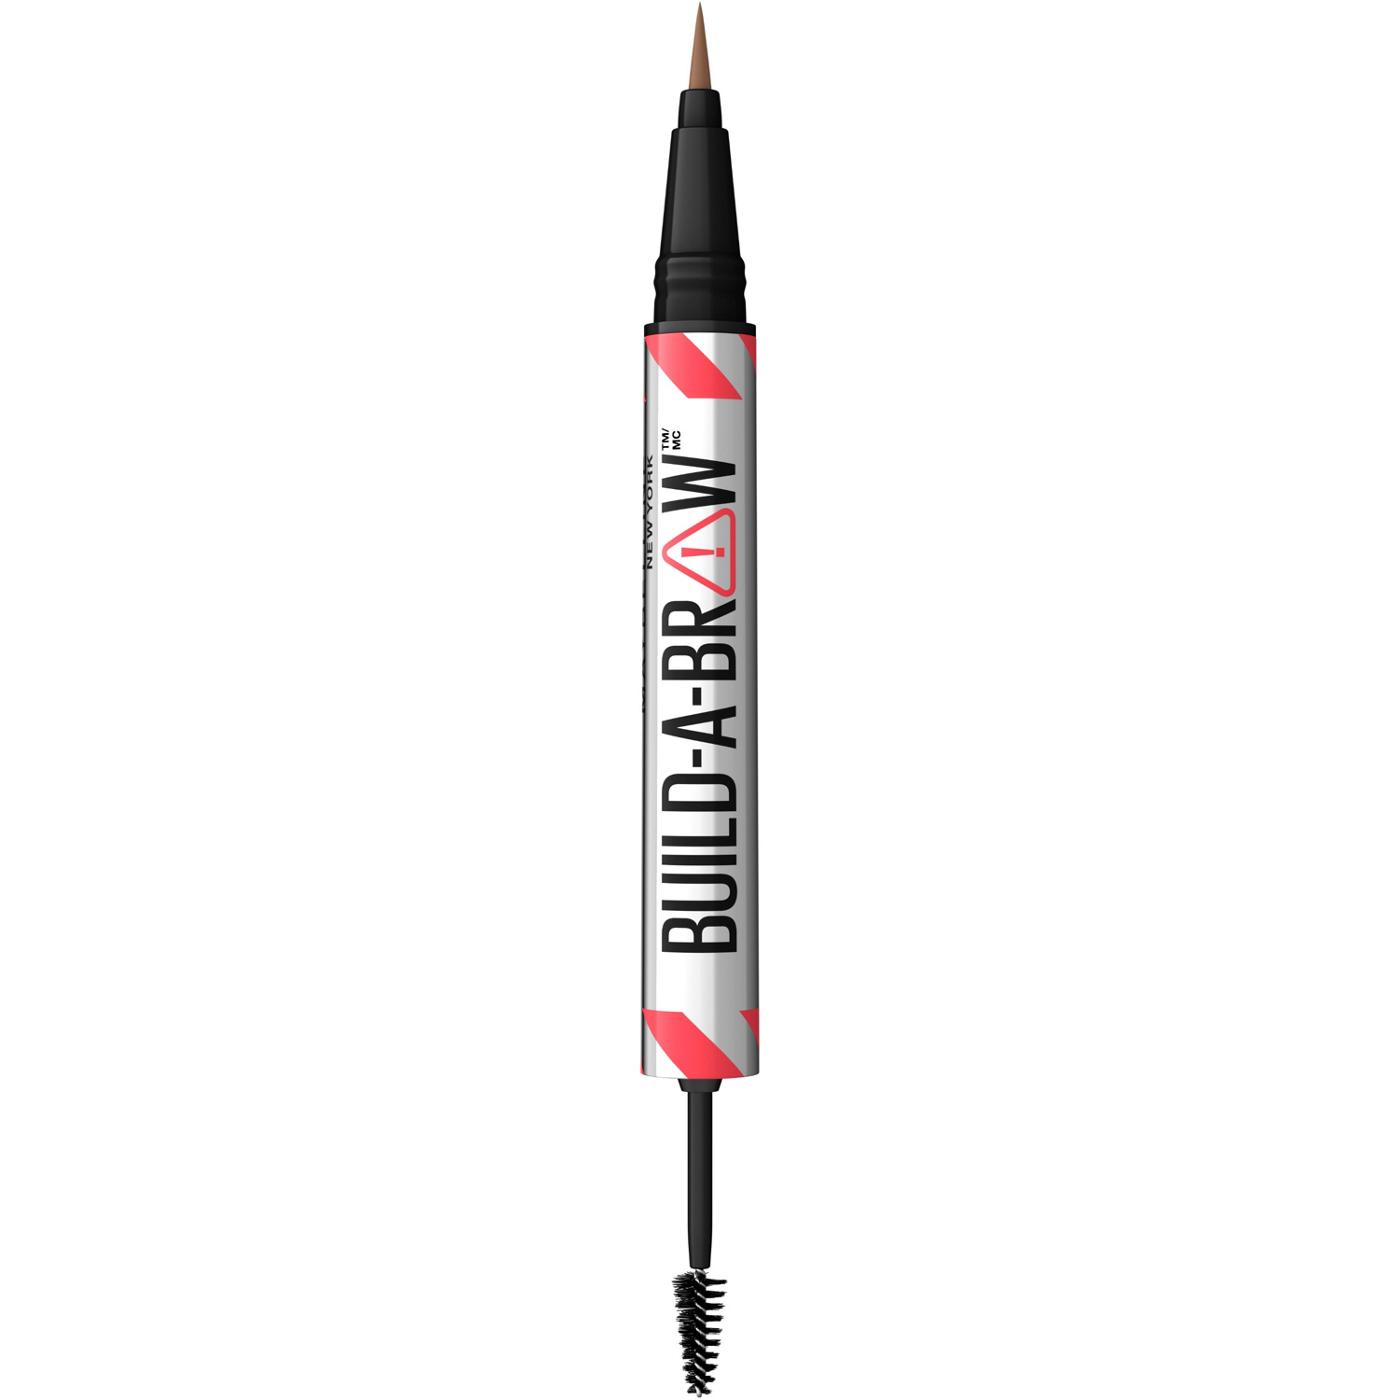 Maybelline Build A Brow 2 In 1 Brow Pen - Soft Brown; image 1 of 16